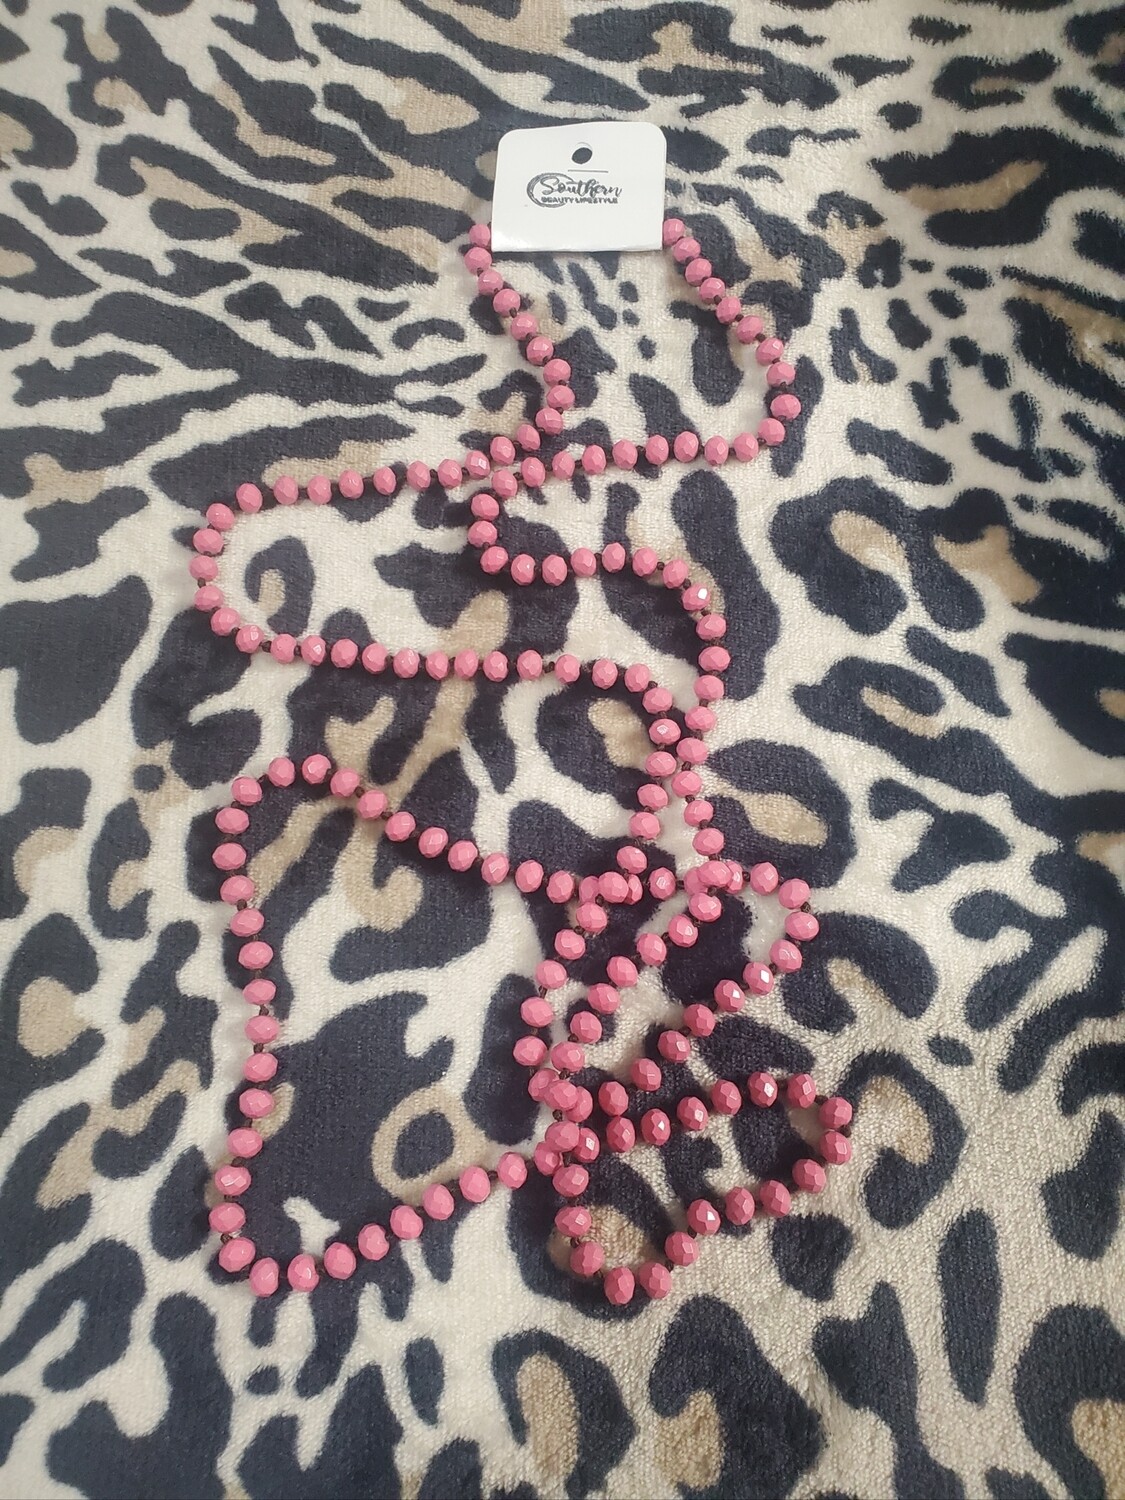 Light Pink Bead Necklace